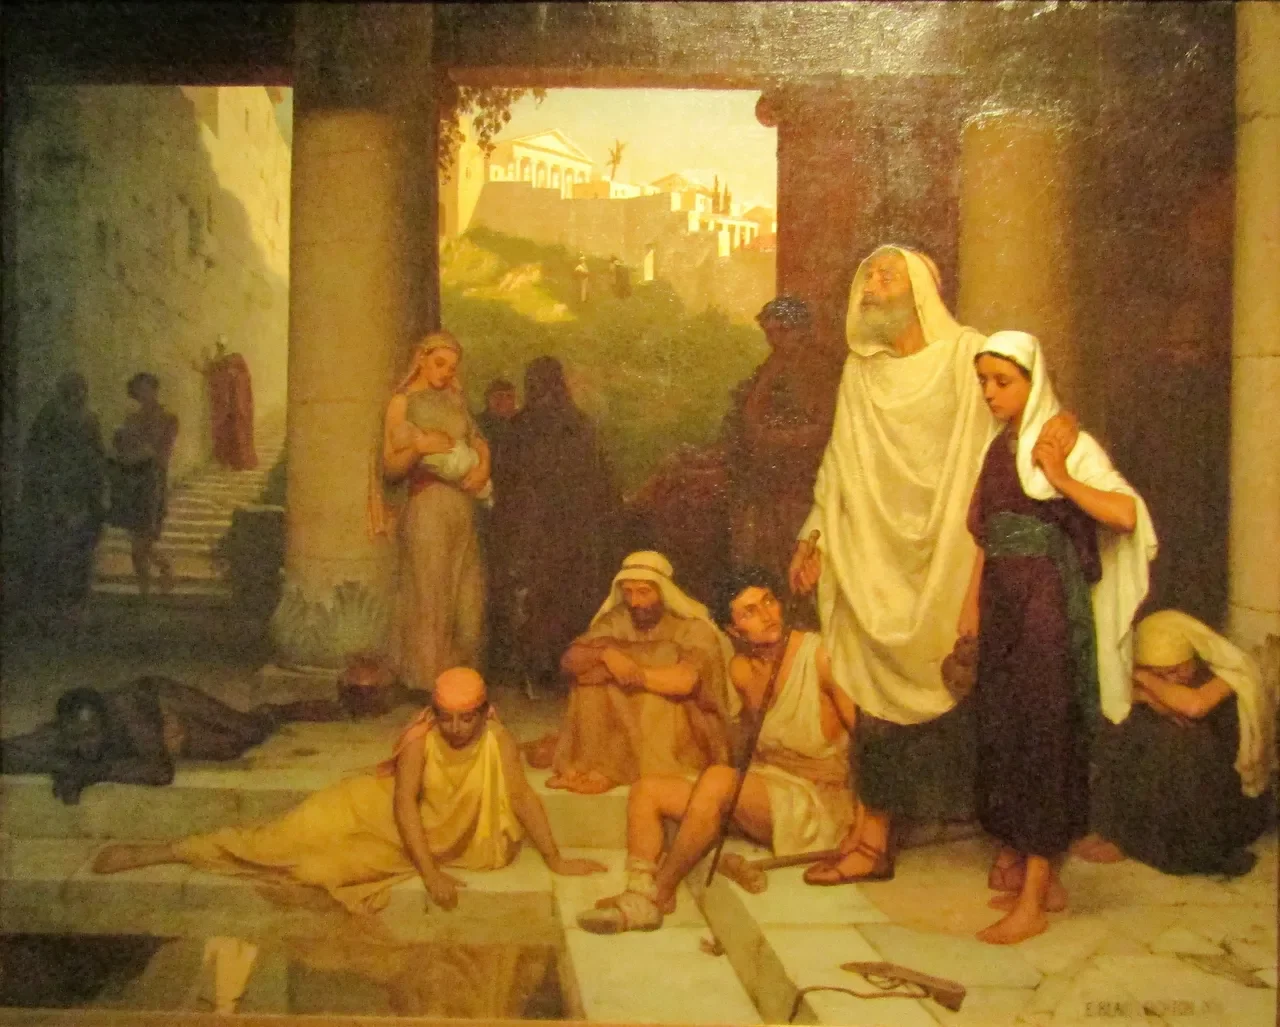 The Blind Man at the Pool of Siloam by Edmund Blair Leighton (1852-1922). Image Source: WikiMedia Commons